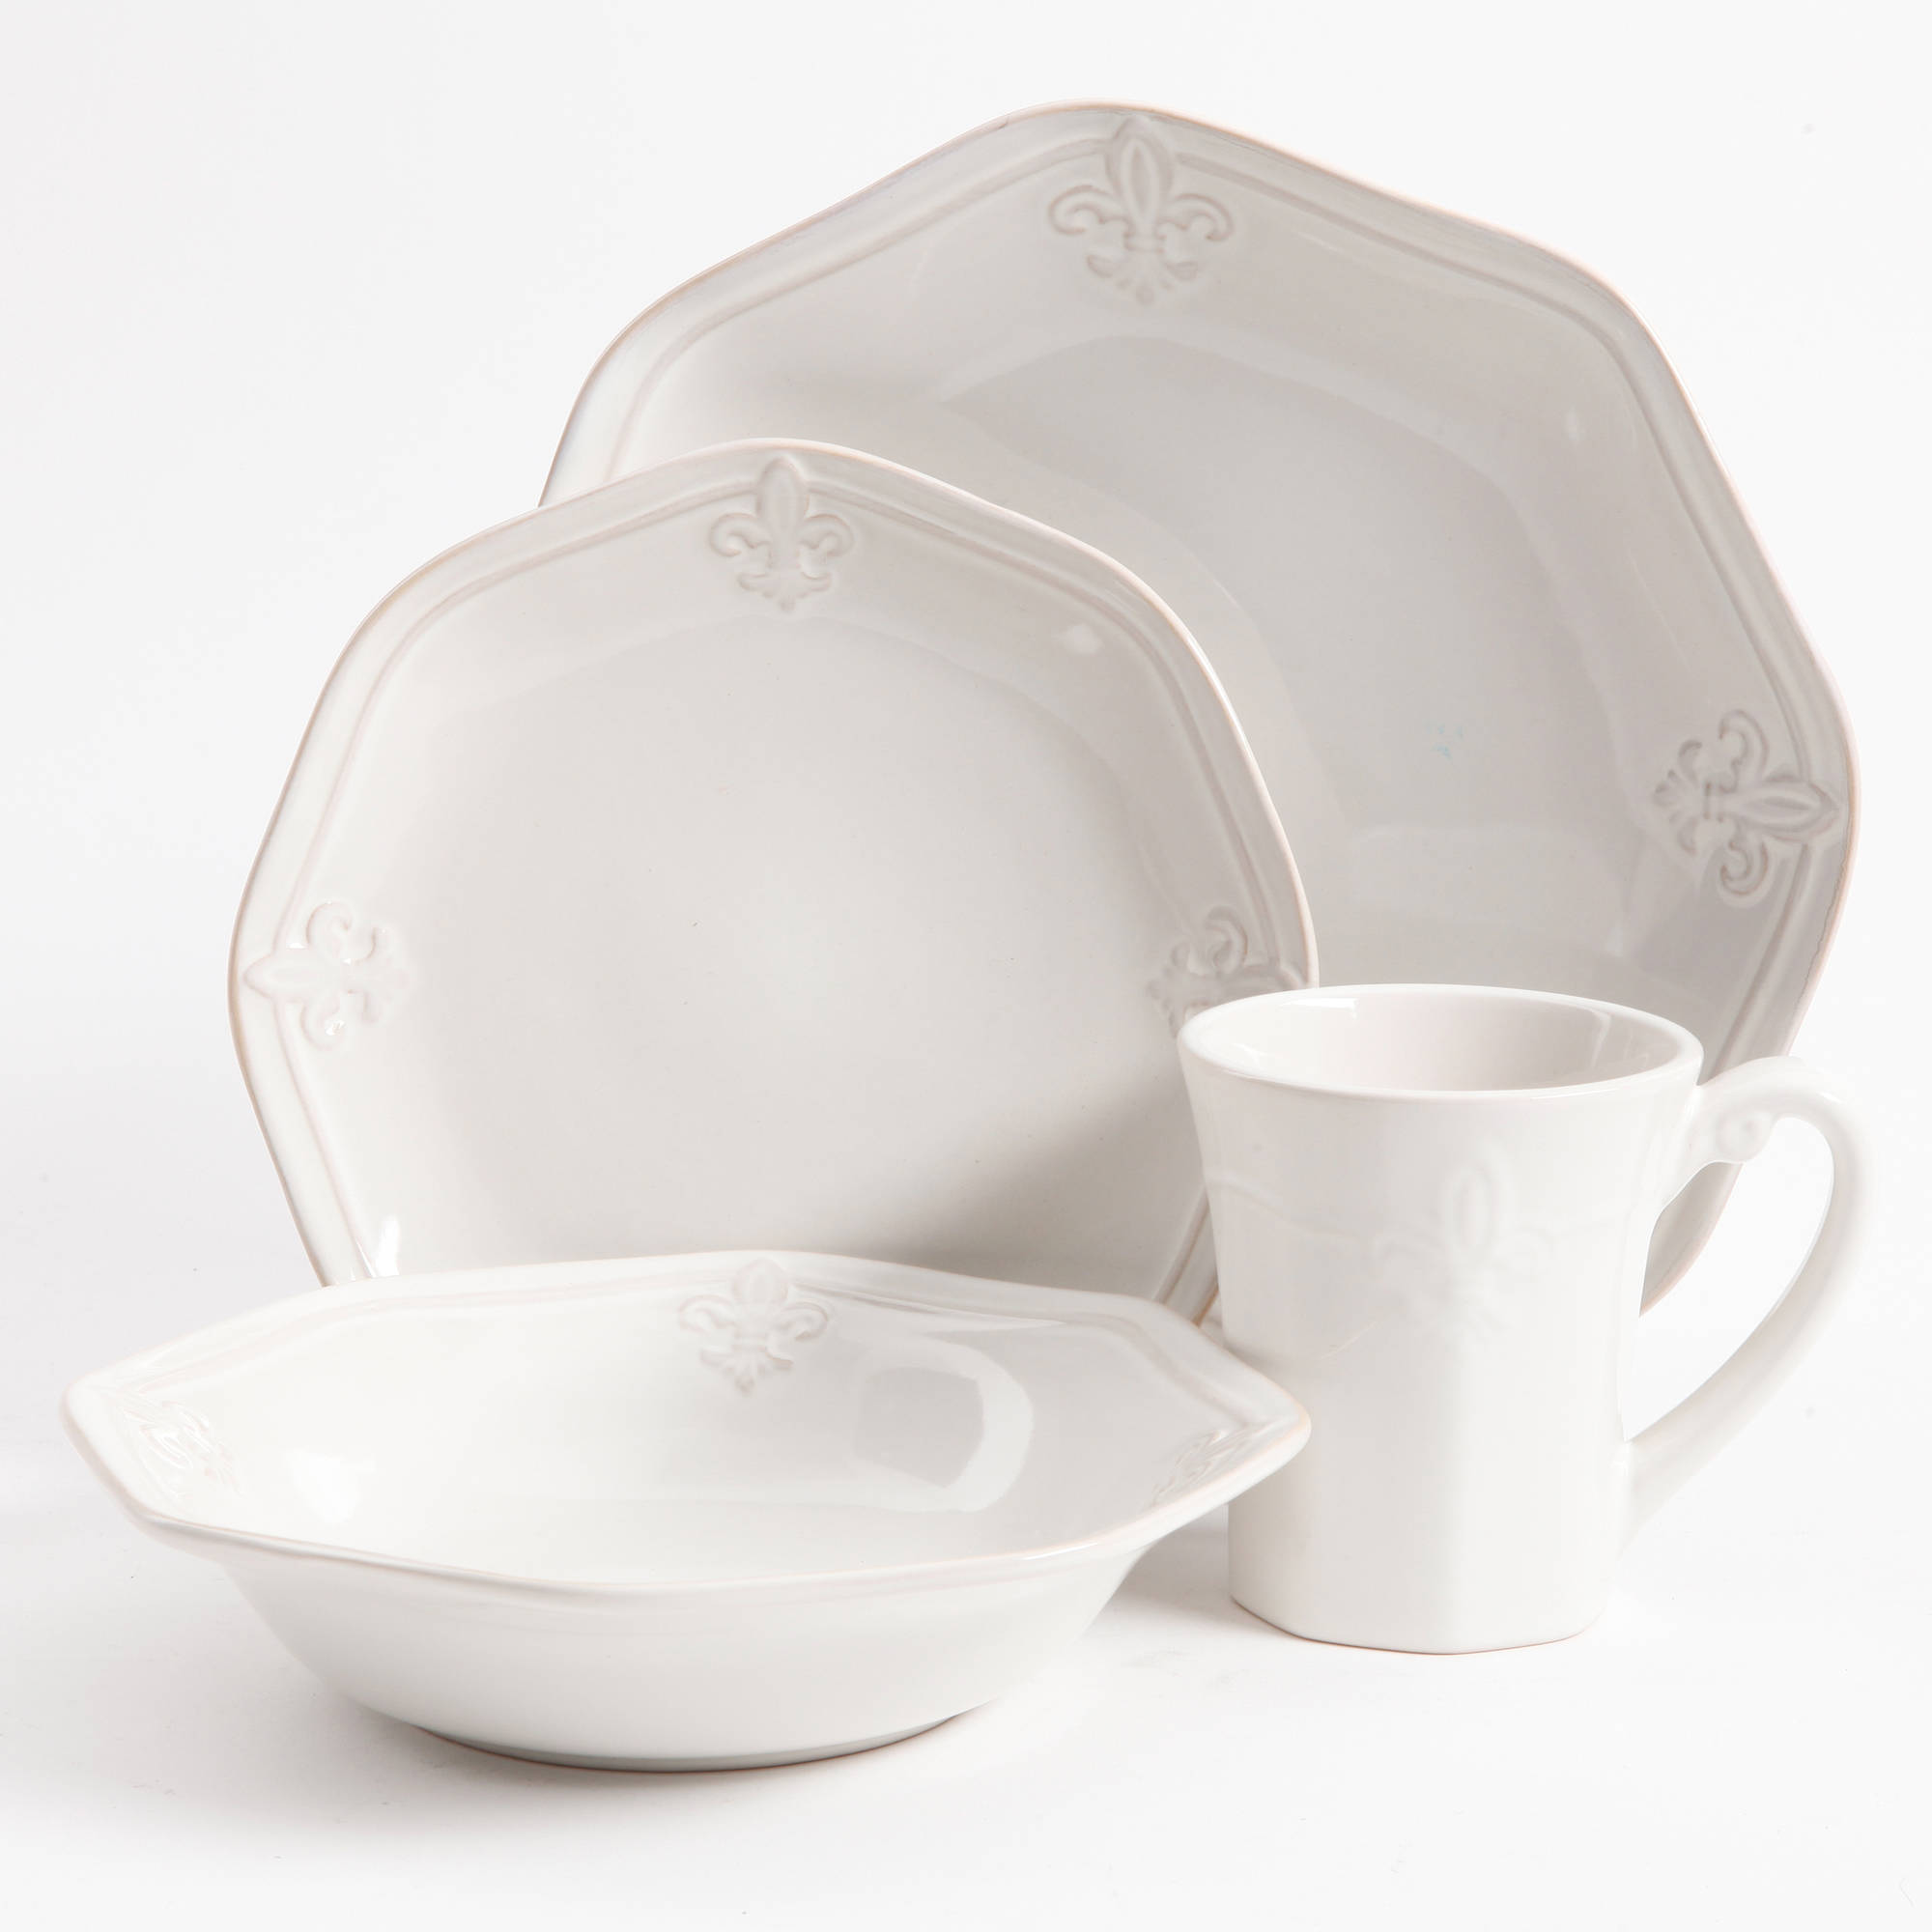 Better Homes & Gardens Country Crest Dinnerware, Set Of 16 - image 3 of 8